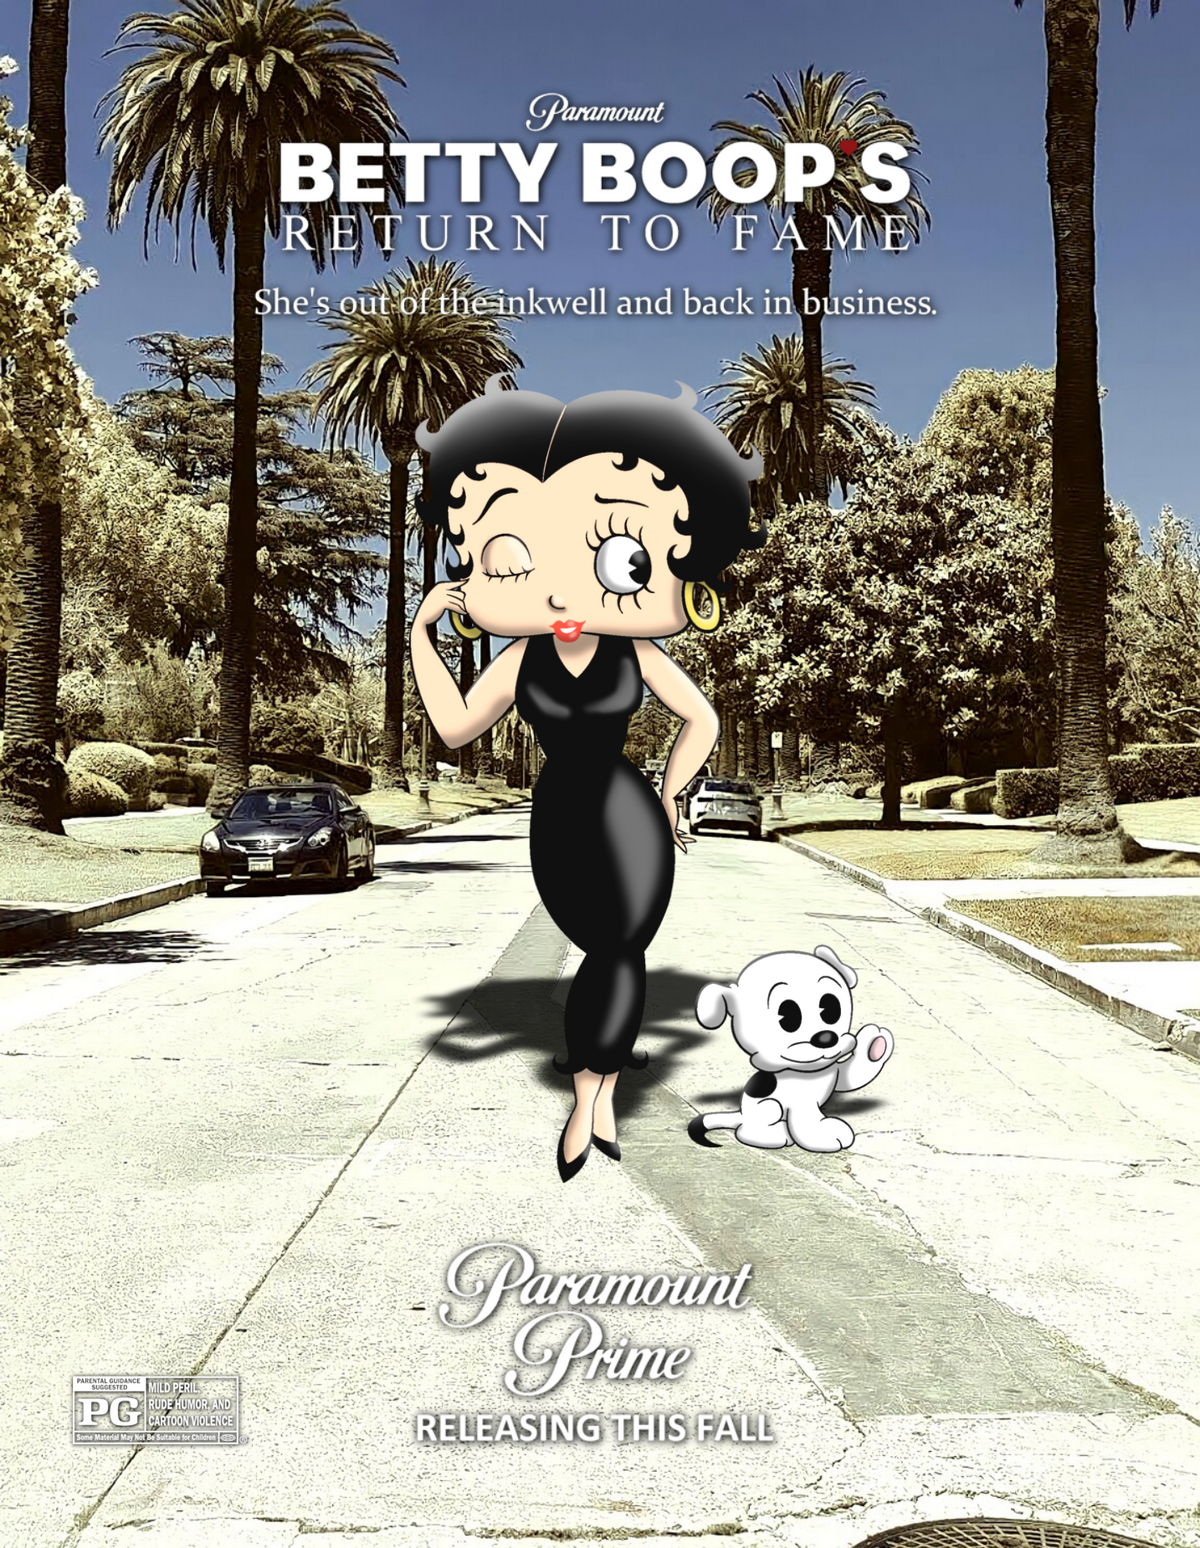 https://static.wikia.nocookie.net/ideas/images/3/36/Betty_Boop%27s_Return_to_Fame_poster.png/revision/latest/scale-to-width-down/1200?cb=20221130072437